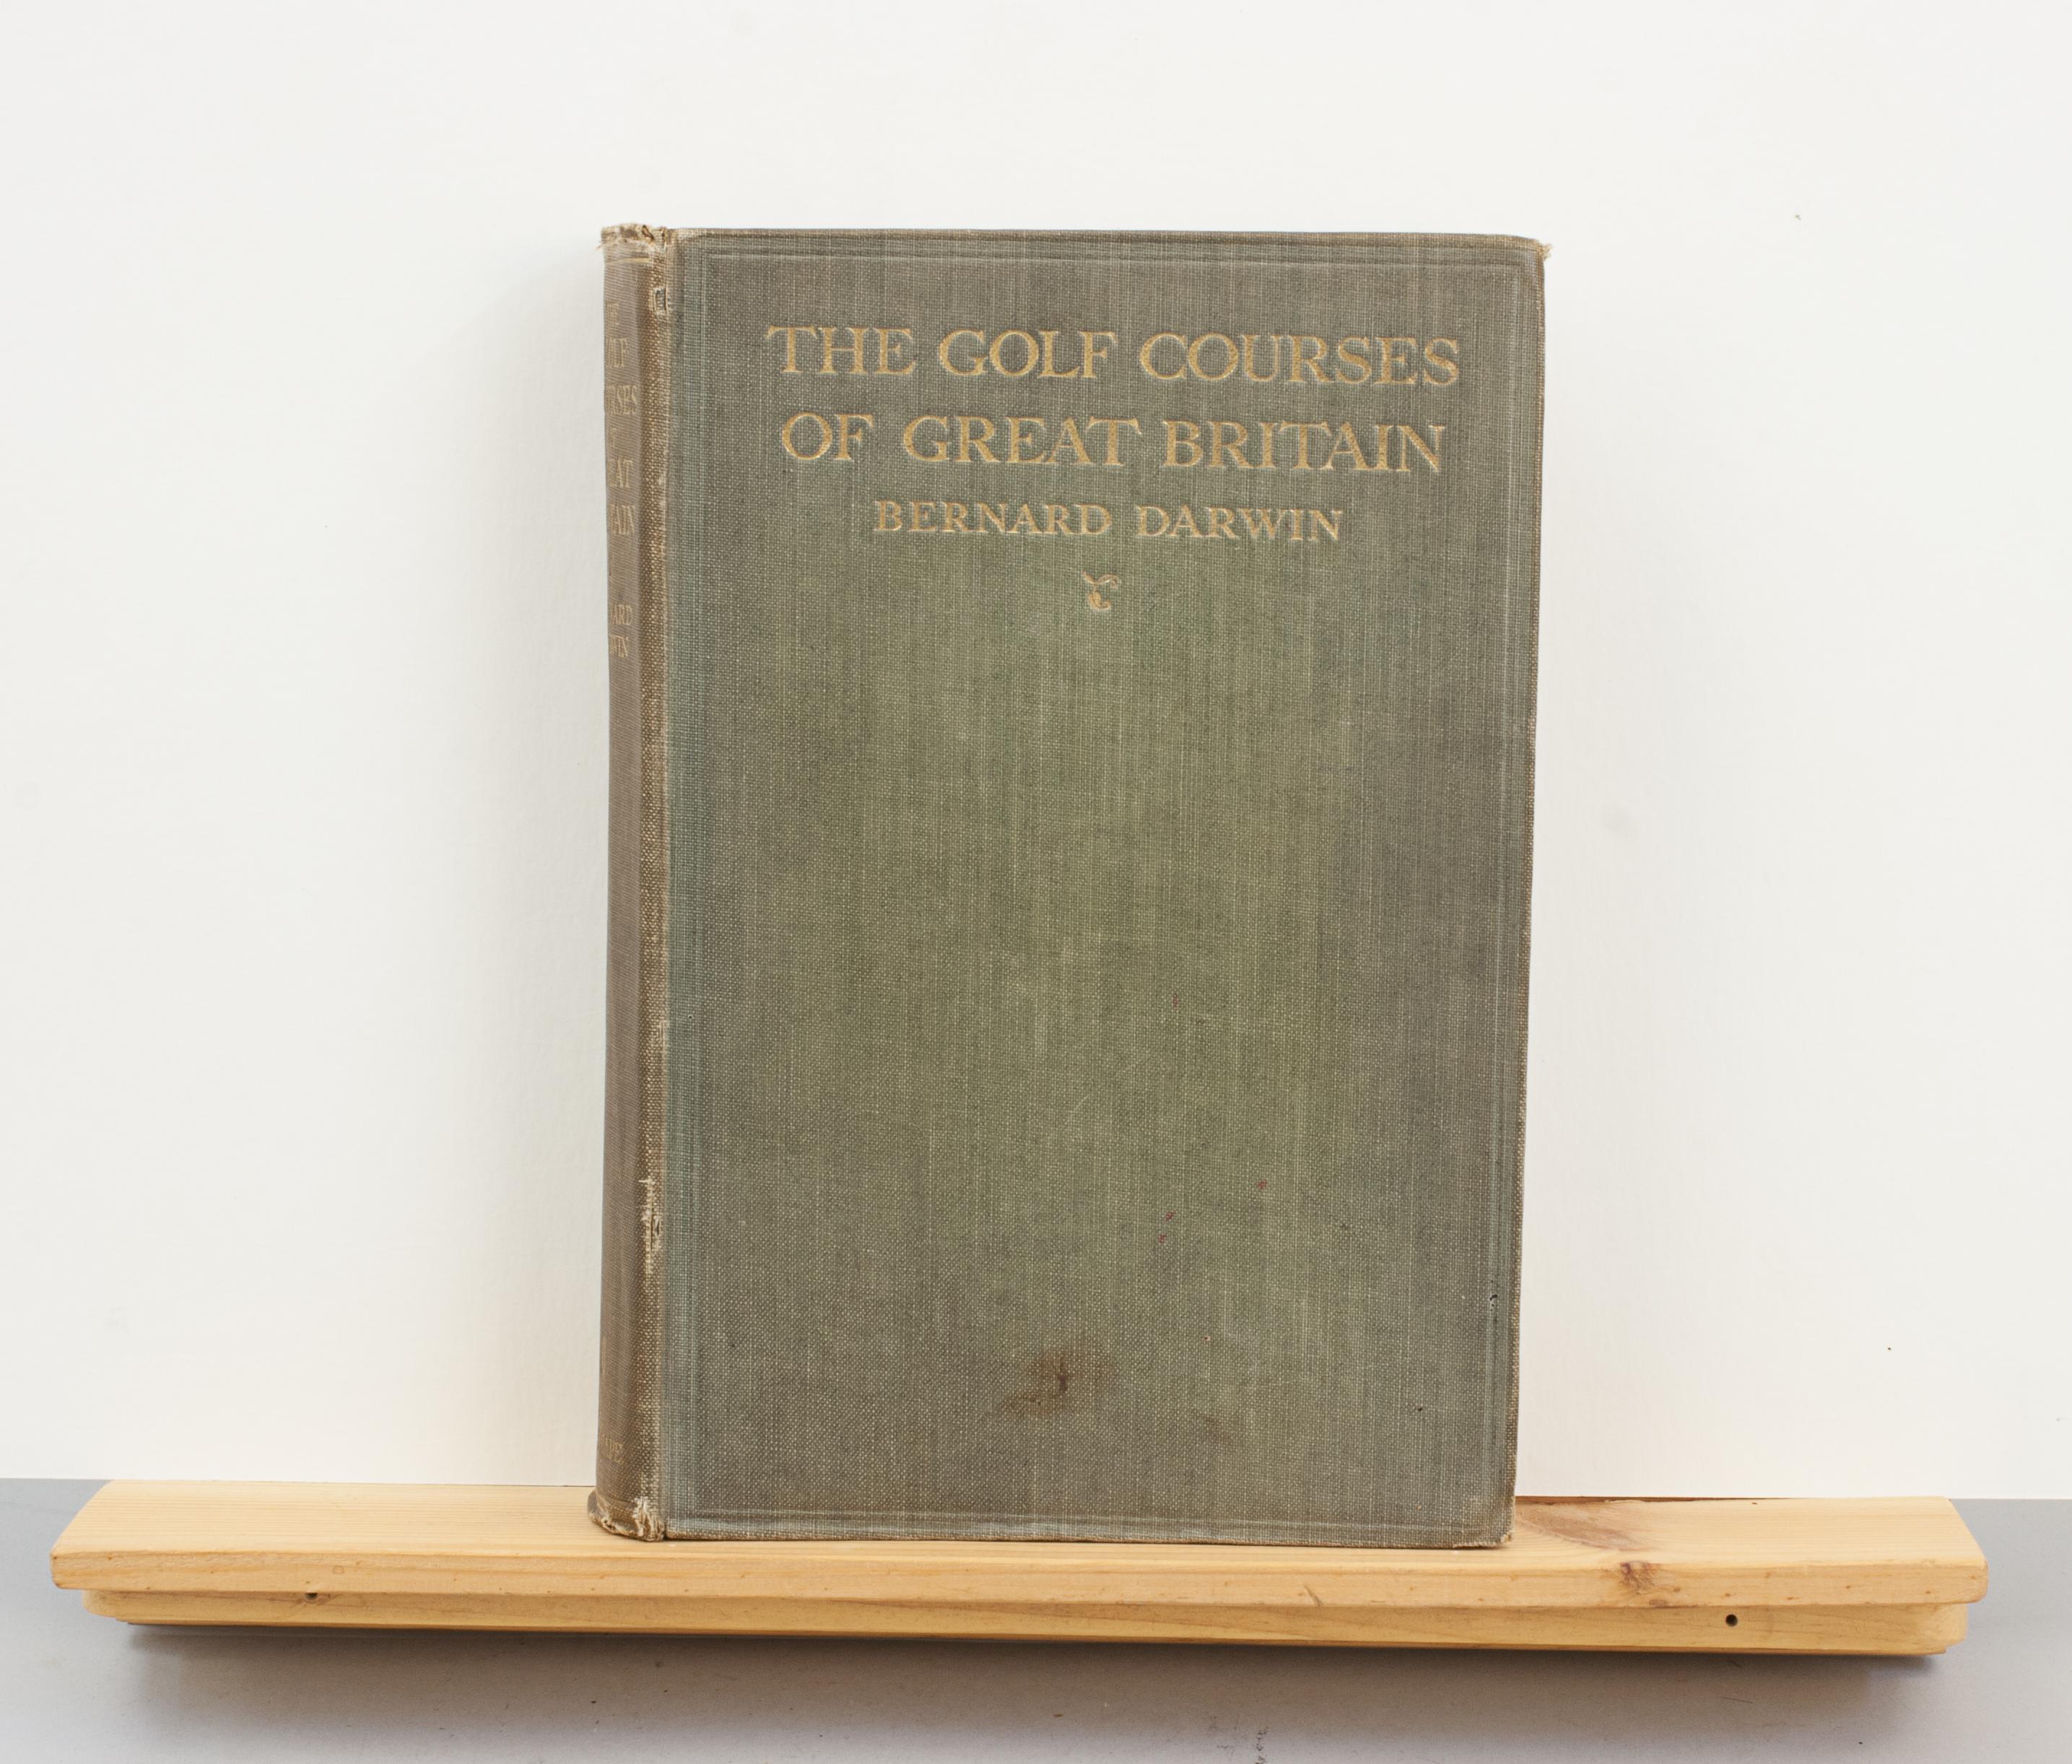 British Vintage Golf Book, The Golf Courses of Great Britain, Bernard Darwin. For Sale